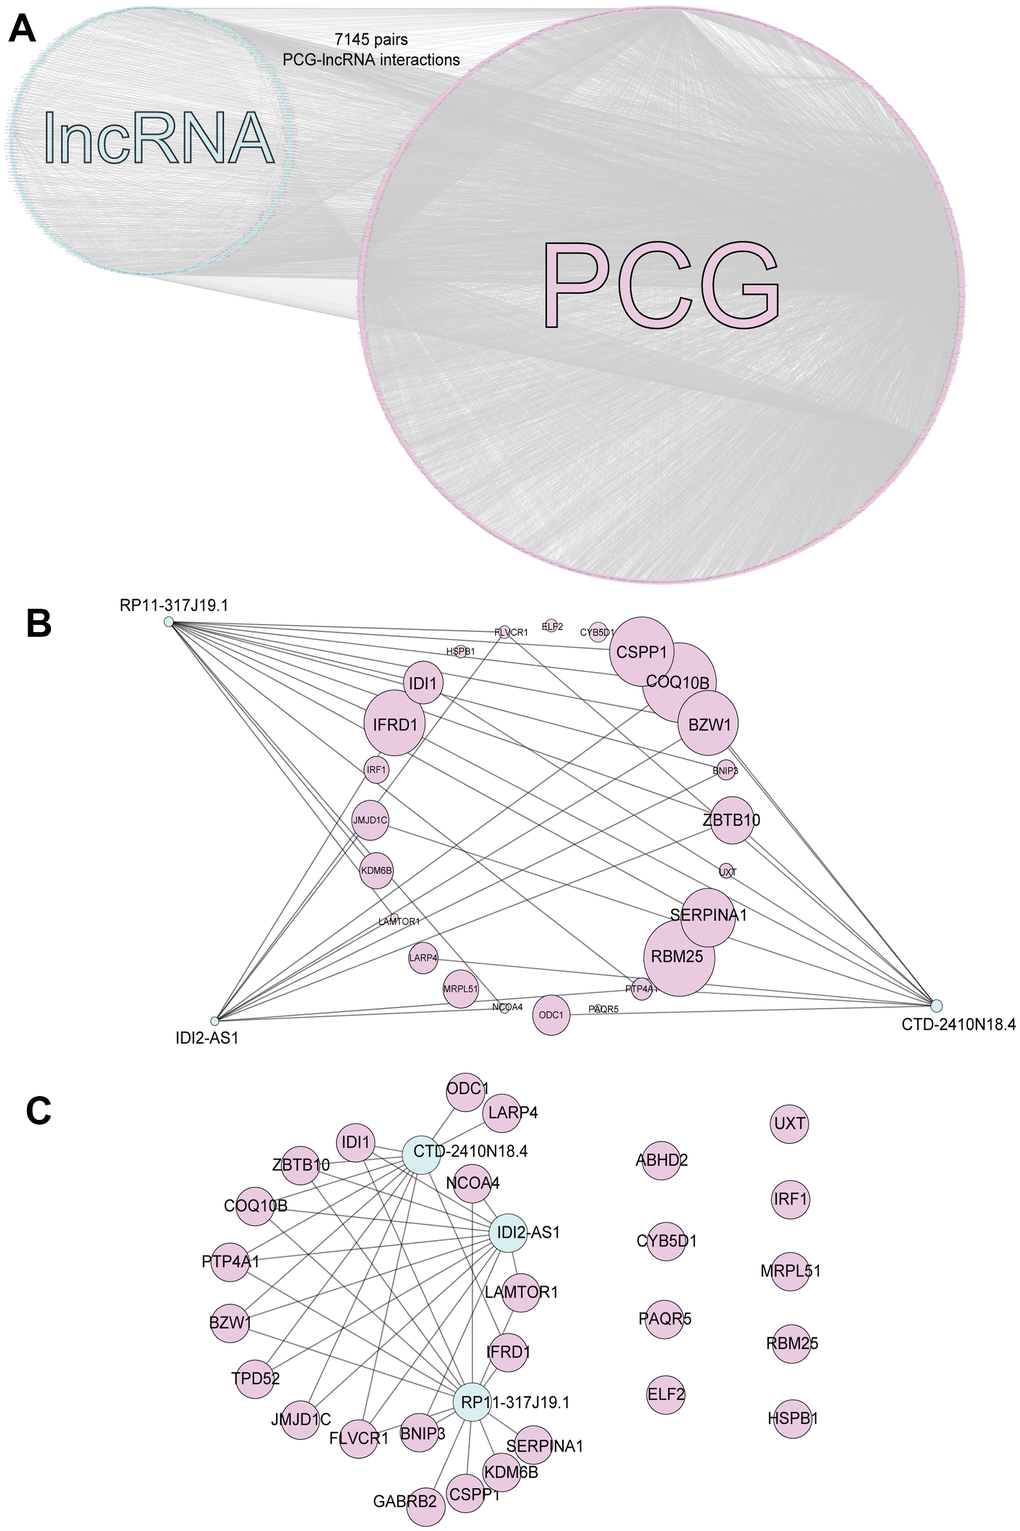 PCG-lncRNA interactions. (A) Network of differentially expressed PCG-lncRNA interactions. (B) Core driver gene network. (C) Interactions between differentially expressed genes and lncRNAs.